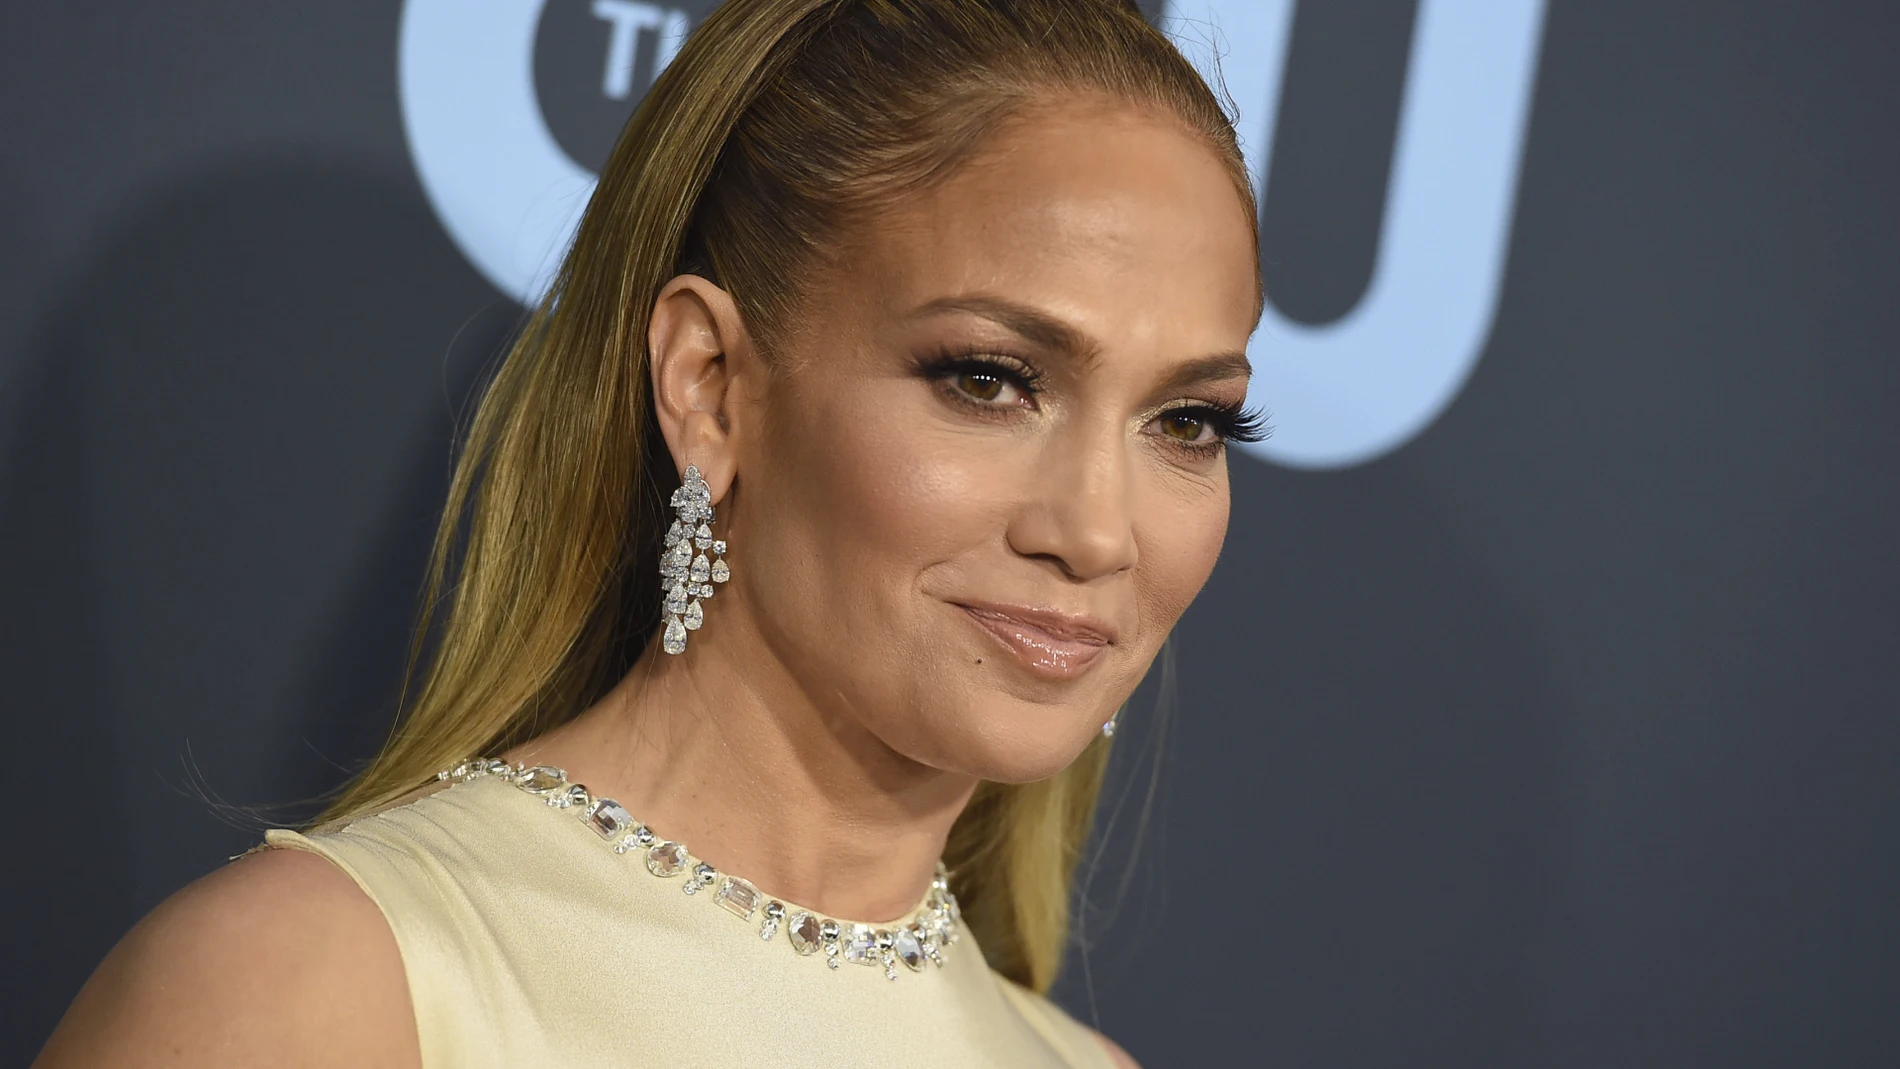 Actress and singer Jennifer Lopez attending the 25th annual Critics' Choice Awards on Sunday, Jan. 12, 2020, in Santa Monica, Calif.